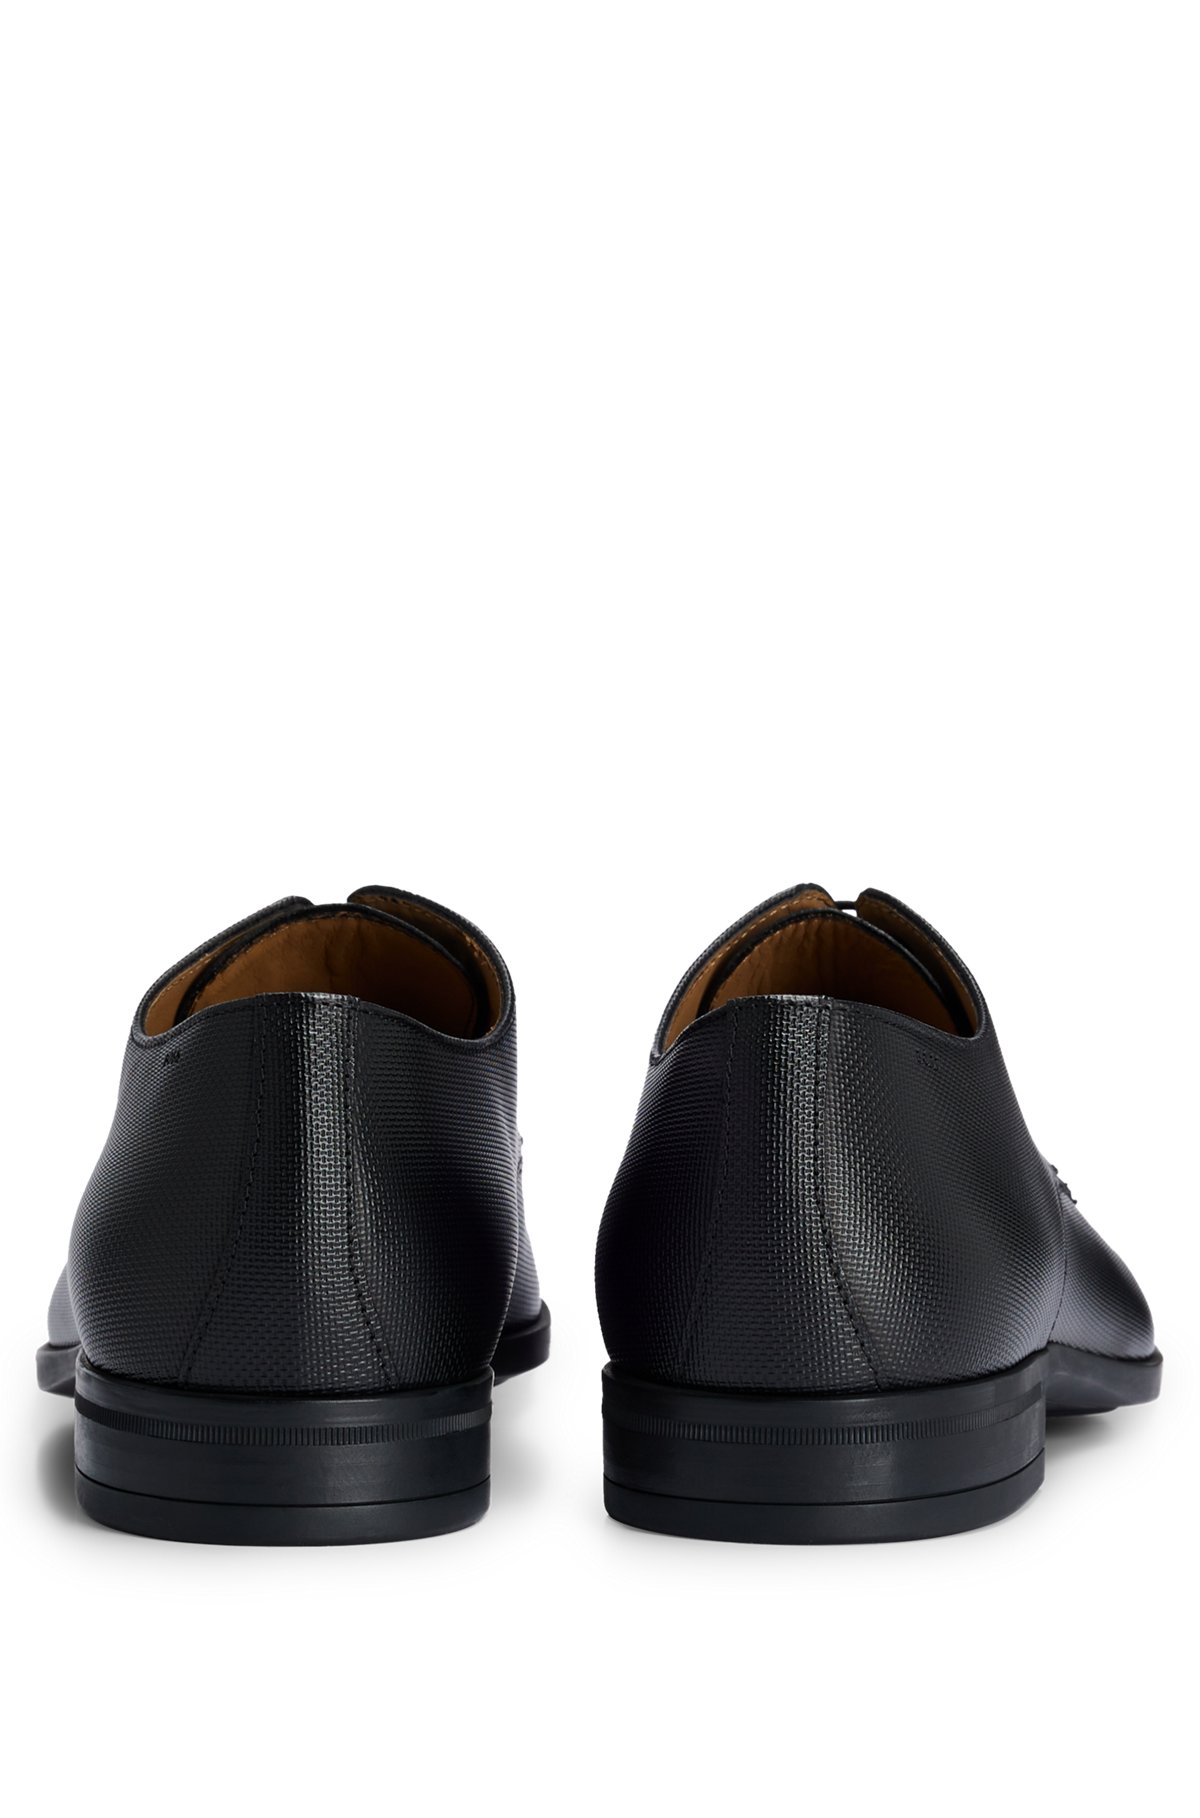 Derby shoes in structured leather with padded insole, Black